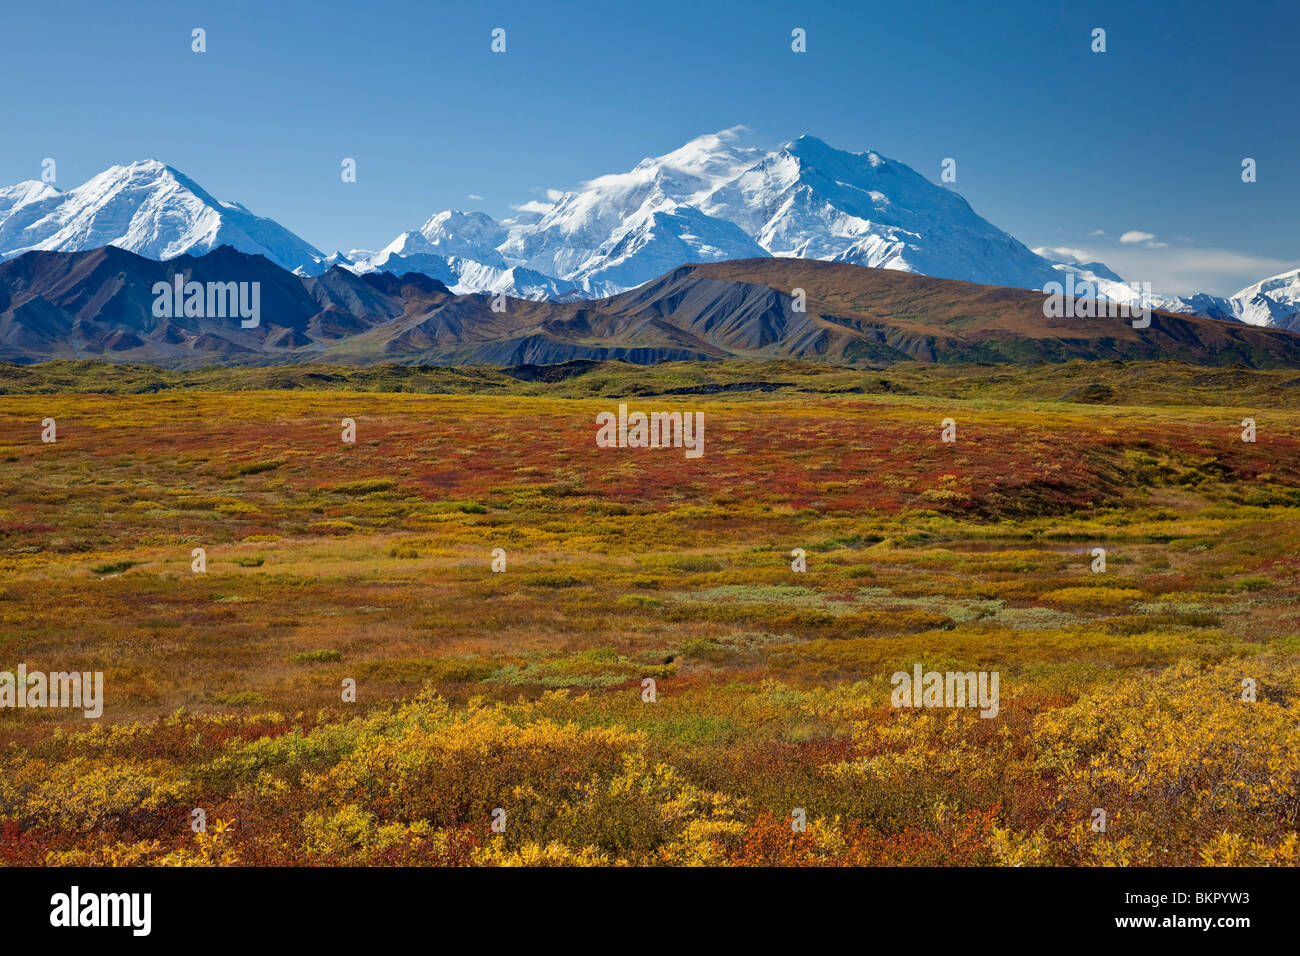 Scenic view of Mt.McKinley from Grassy Pass with colorful Autumn tundra in the foreground, Denali National Park, Alaska Stock Photo